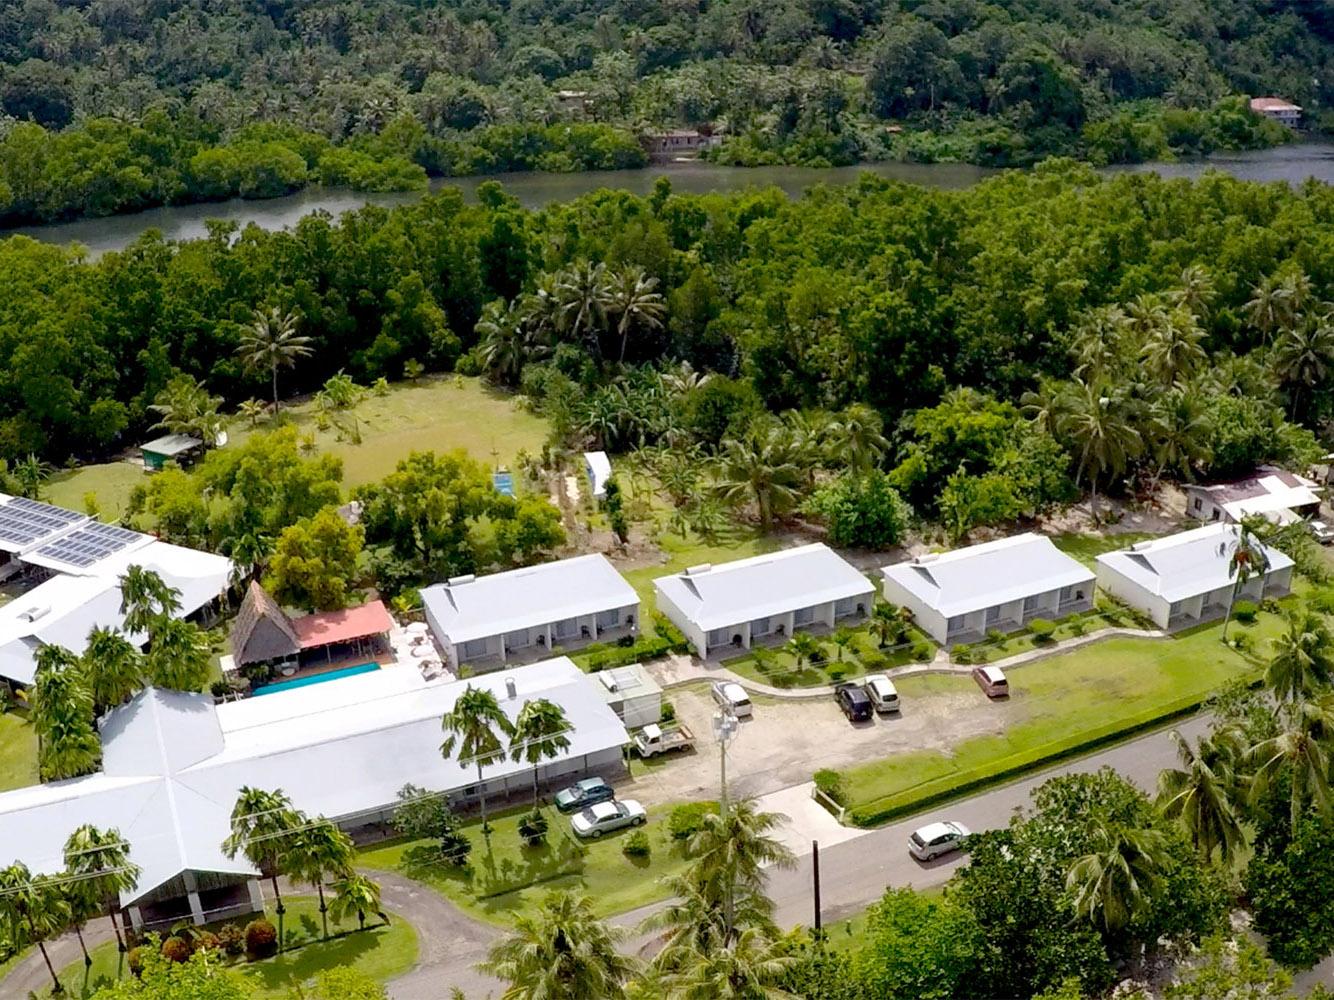 One lucky winner will own the Kosrae Nautilus Resort, pictured.